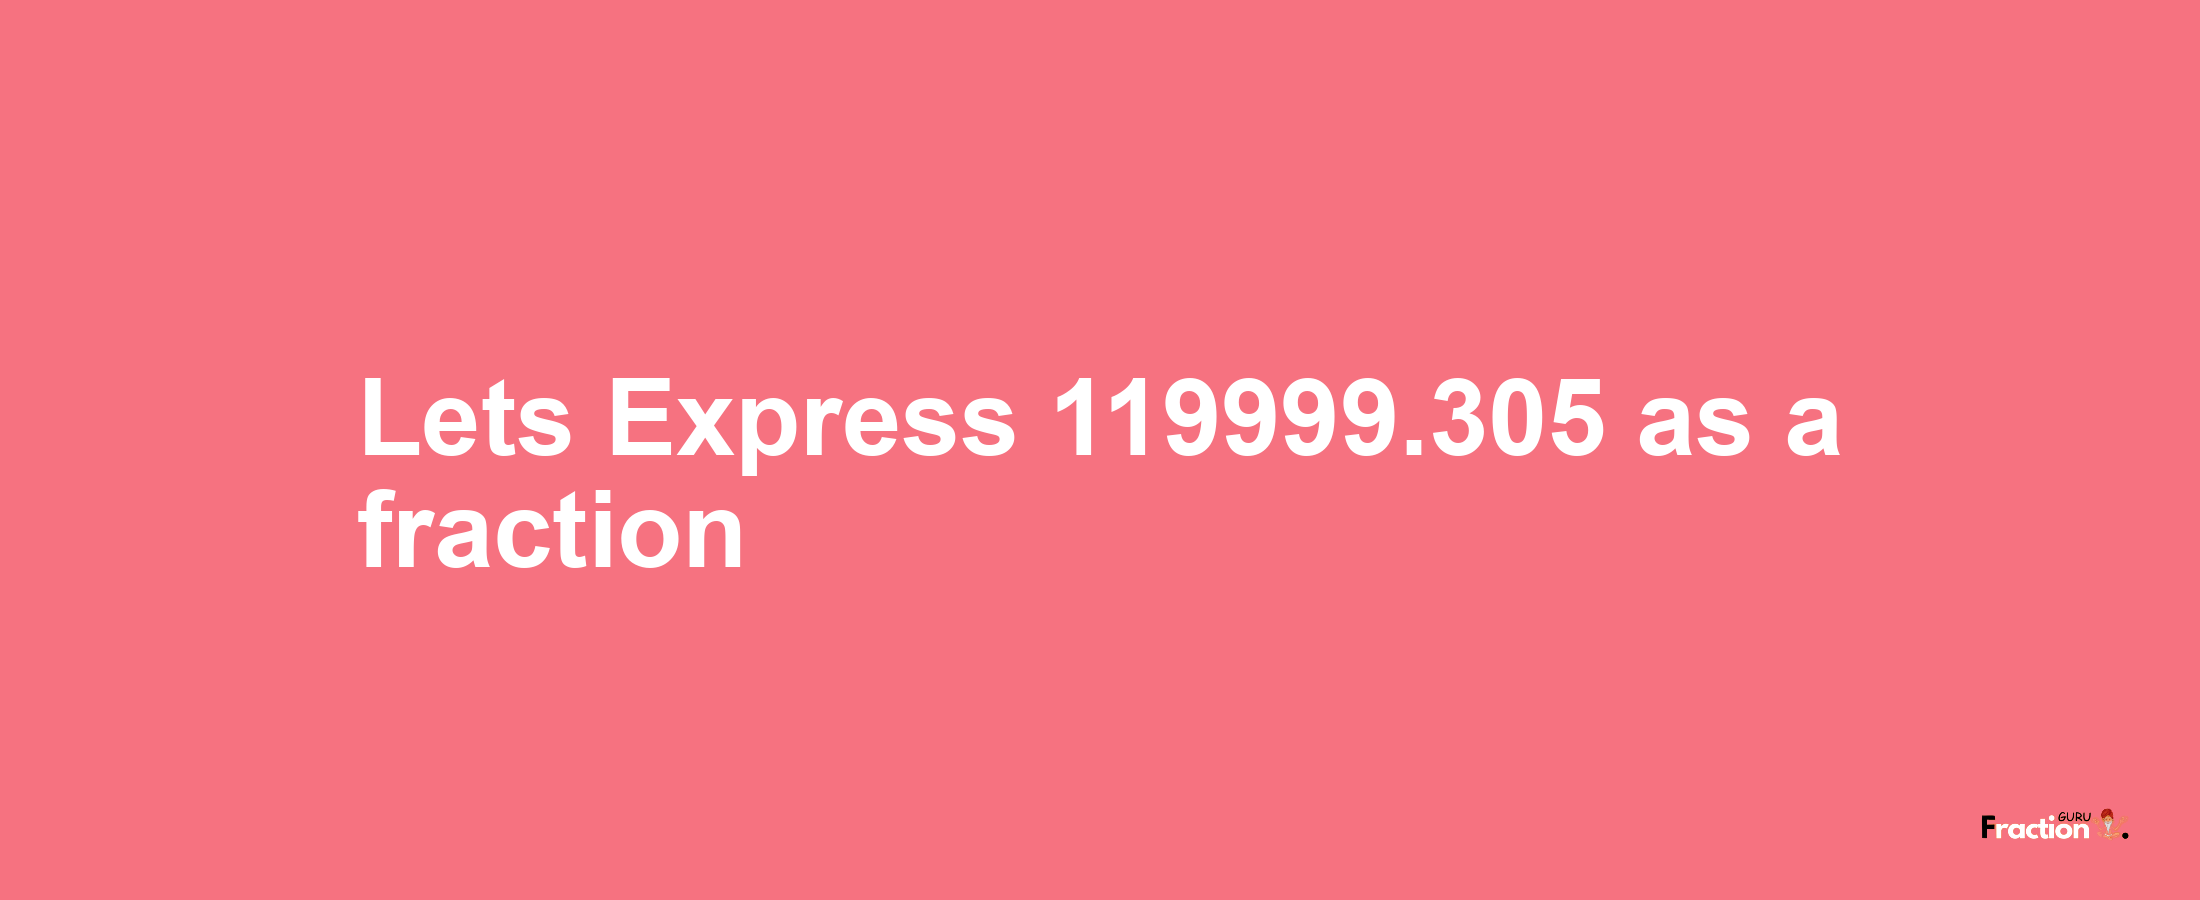 Lets Express 119999.305 as afraction